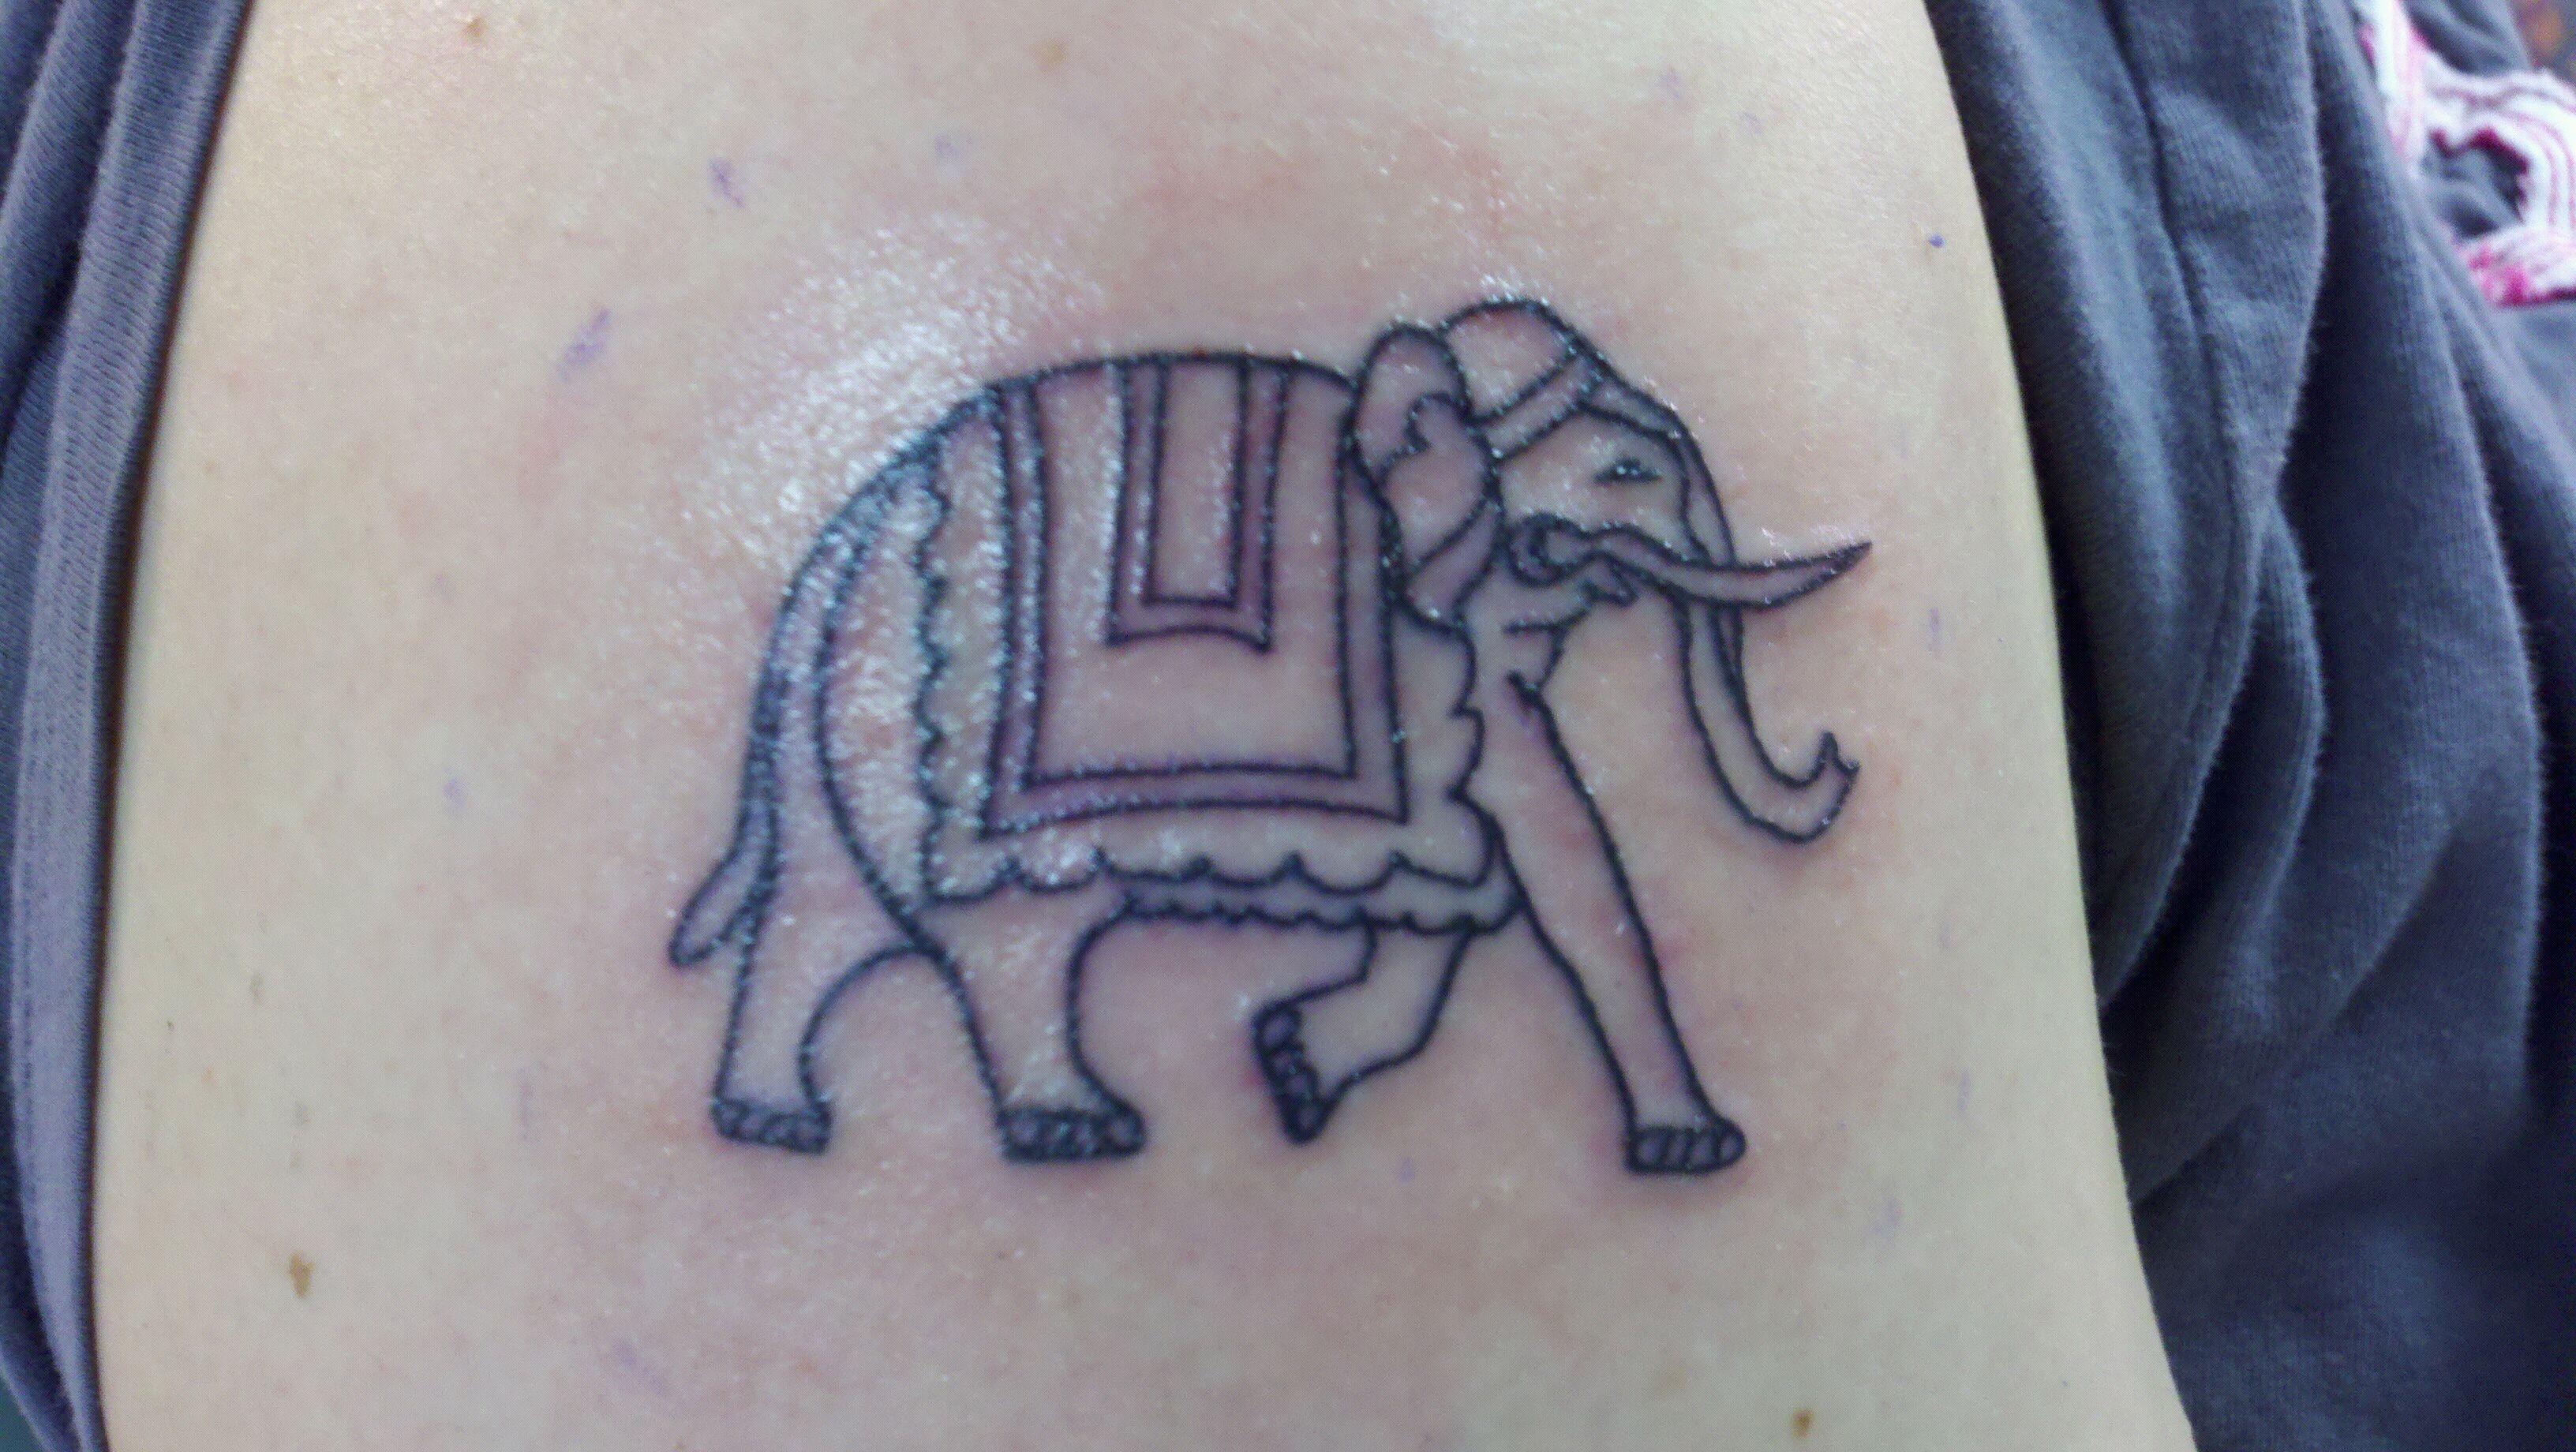 Elephant Tattoos Designs, Ideas and Meaning | Tattoos For You